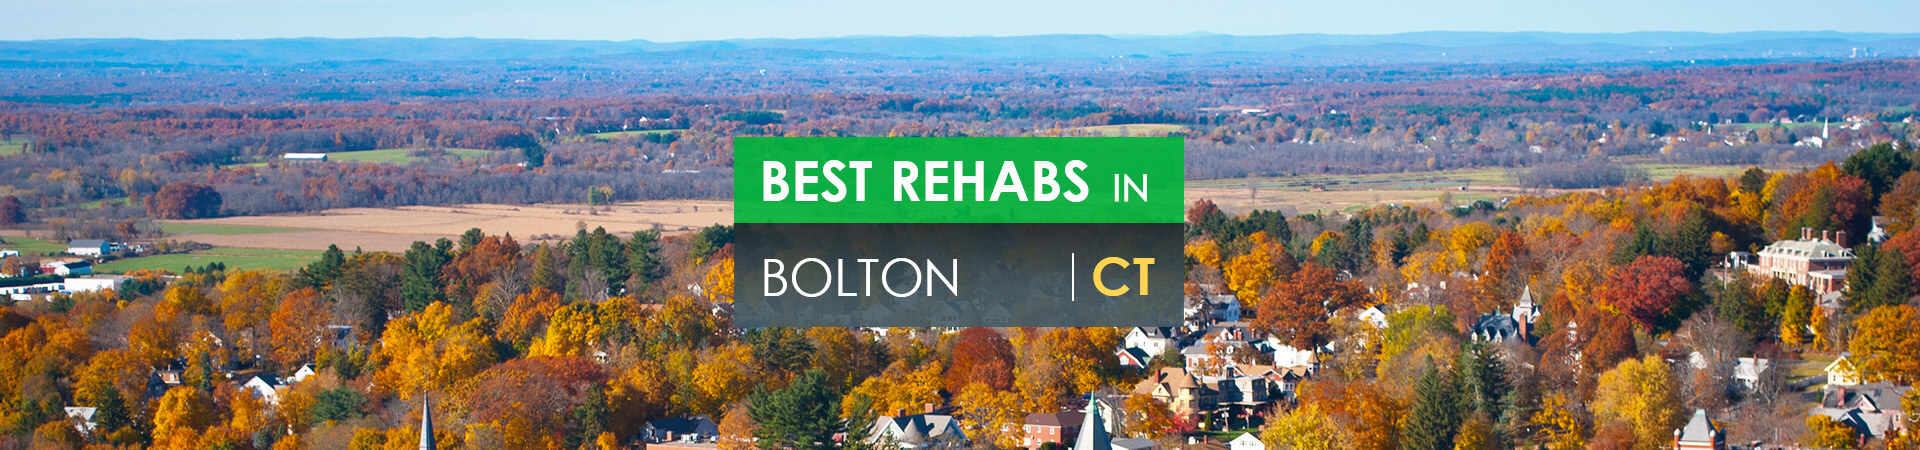 Best rehabs in Bolton, CT